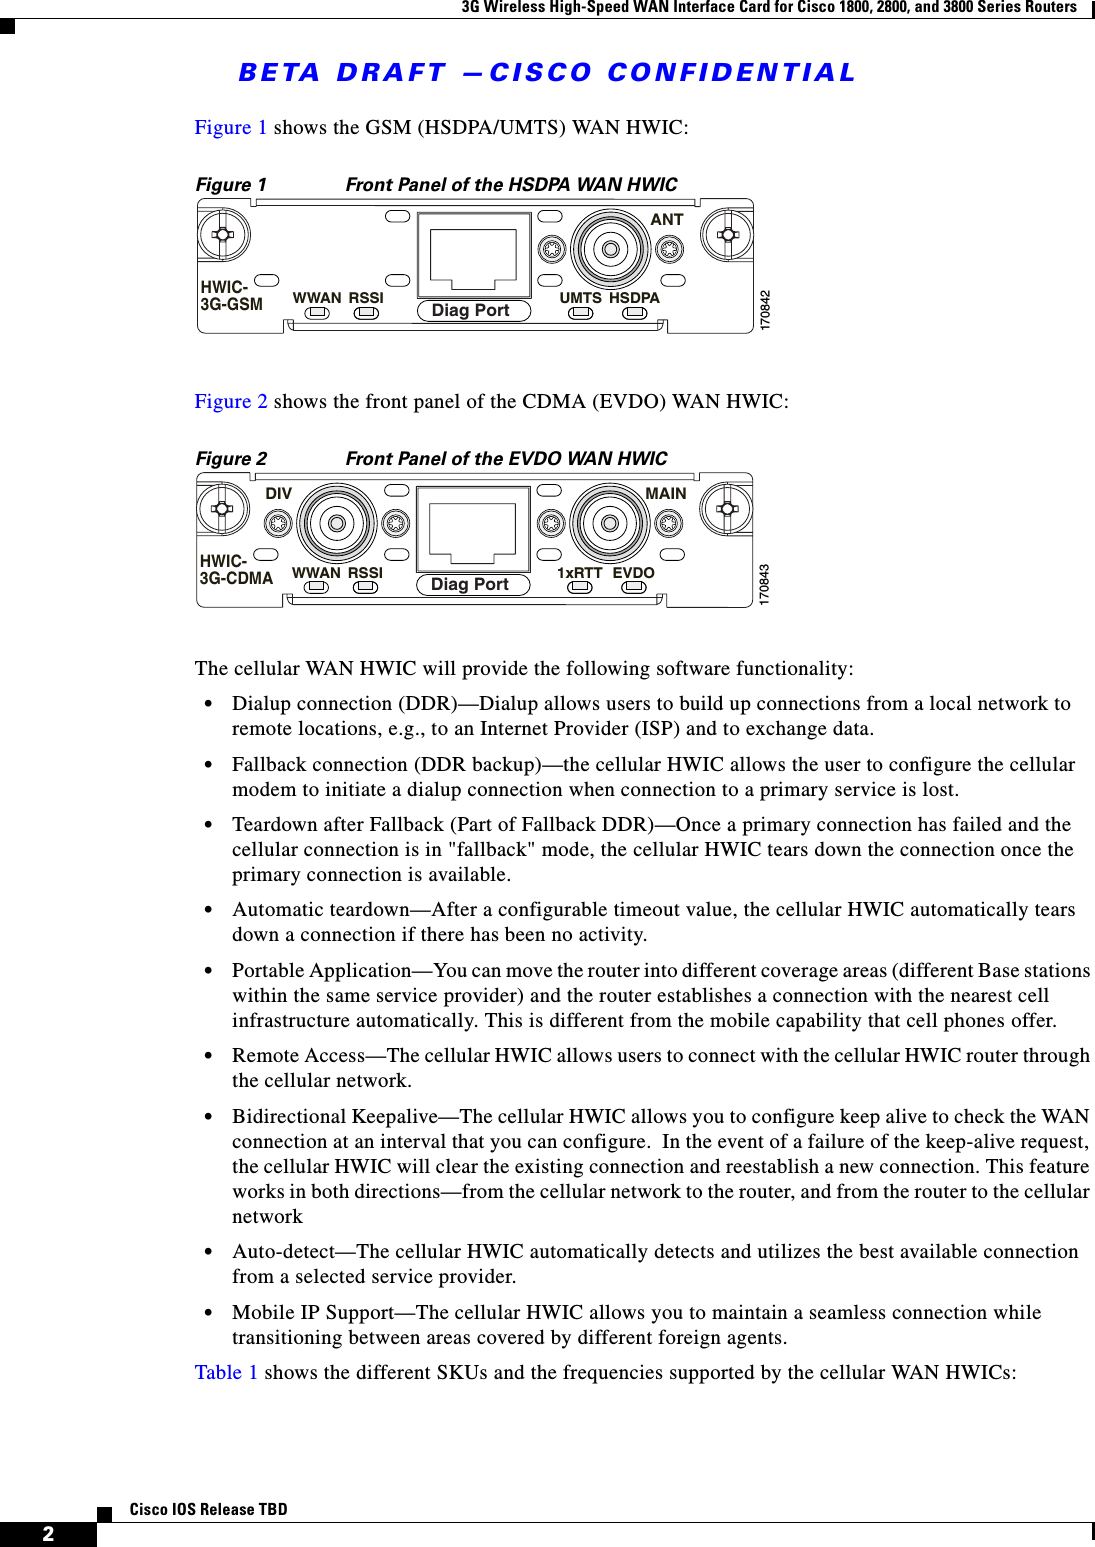 BETA DRAFT —CISCO CONFIDENTIAL3G Wireless High-Speed WAN Interface Card for Cisco 1800, 2800, and 3800 Series Routers2Cisco IOS Release TBDFigure 1 shows the GSM (HSDPA/UMTS) WAN HWIC:Figure 1 Front Panel of the HSDPA WAN HWICFigure 2 shows the front panel of the CDMA (EVDO) WAN HWIC:Figure 2 Front Panel of the EVDO WAN HWIC The cellular WAN HWIC will provide the following software functionality:•Dialup connection (DDR)—Dialup allows users to build up connections from a local network to remote locations, e.g., to an Internet Provider (ISP) and to exchange data.•Fallback connection (DDR backup)—the cellular HWIC allows the user to configure the cellular modem to initiate a dialup connection when connection to a primary service is lost.•Teardown after Fallback (Part of Fallback DDR)—Once a primary connection has failed and the cellular connection is in &quot;fallback&quot; mode, the cellular HWIC tears down the connection once the primary connection is available. •Automatic teardown—After a configurable timeout value, the cellular HWIC automatically tears down a connection if there has been no activity. •Portable Application—You can move the router into different coverage areas (different Base stations within the same service provider) and the router establishes a connection with the nearest cell infrastructure automatically. This is different from the mobile capability that cell phones offer.•Remote Access—The cellular HWIC allows users to connect with the cellular HWIC router through the cellular network. •Bidirectional Keepalive—The cellular HWIC allows you to configure keep alive to check the WAN connection at an interval that you can configure.  In the event of a failure of the keep-alive request, the cellular HWIC will clear the existing connection and reestablish a new connection. This feature works in both directions—from the cellular network to the router, and from the router to the cellular network•Auto-detect—The cellular HWIC automatically detects and utilizes the best available connection from a selected service provider.•Mobile IP Support—The cellular HWIC allows you to maintain a seamless connection while transitioning between areas covered by different foreign agents.Table 1 shows the different SKUs and the frequencies supported by the cellular WAN HWICs:170842WWAN RSSI UMTSANTHSDPAHWIC-3G-GSMDiag Port170843WWAN RSSI 1xRTTMAINDIVEVDOHWIC-3G-CDMADiag Port